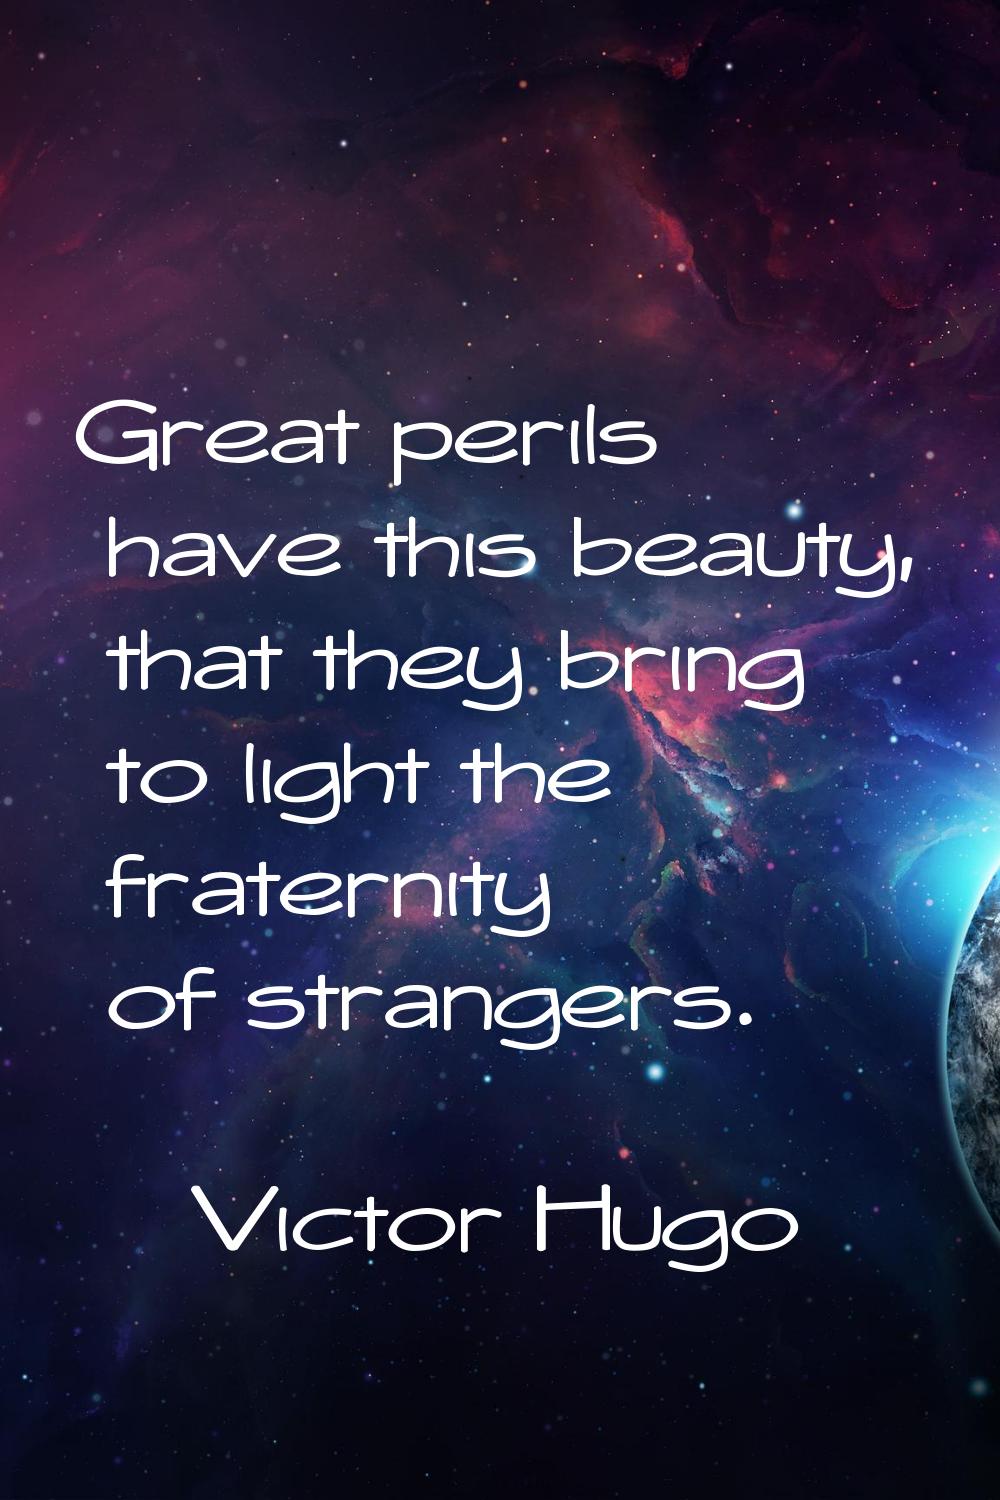 Great perils have this beauty, that they bring to light the fraternity of strangers.